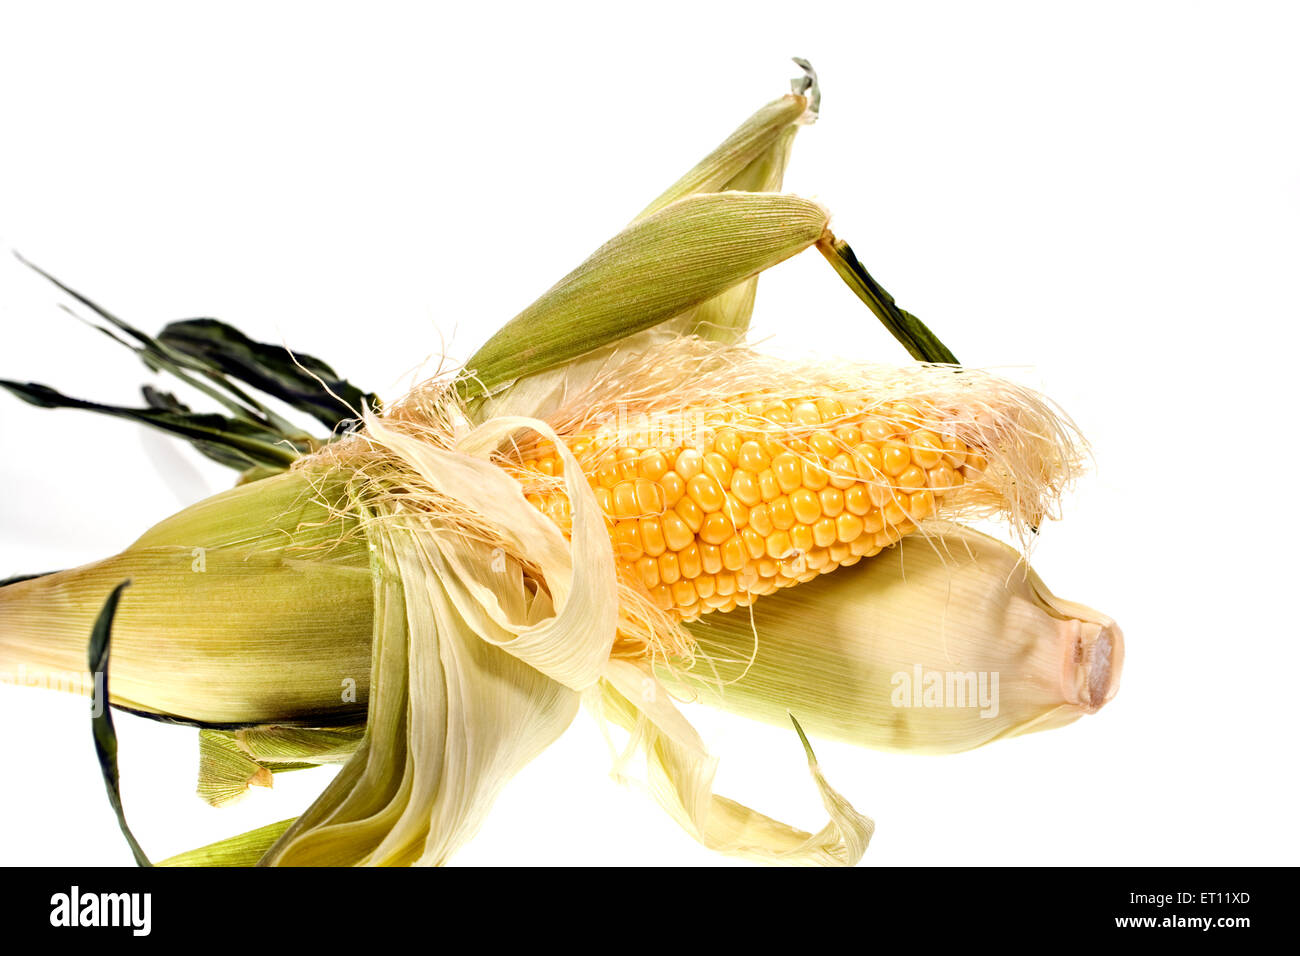 Two ears of fresh, uncooked corn on the cob.  One ear, partially shucked (leaves peeled back) is laying across the other ear. Stock Photo